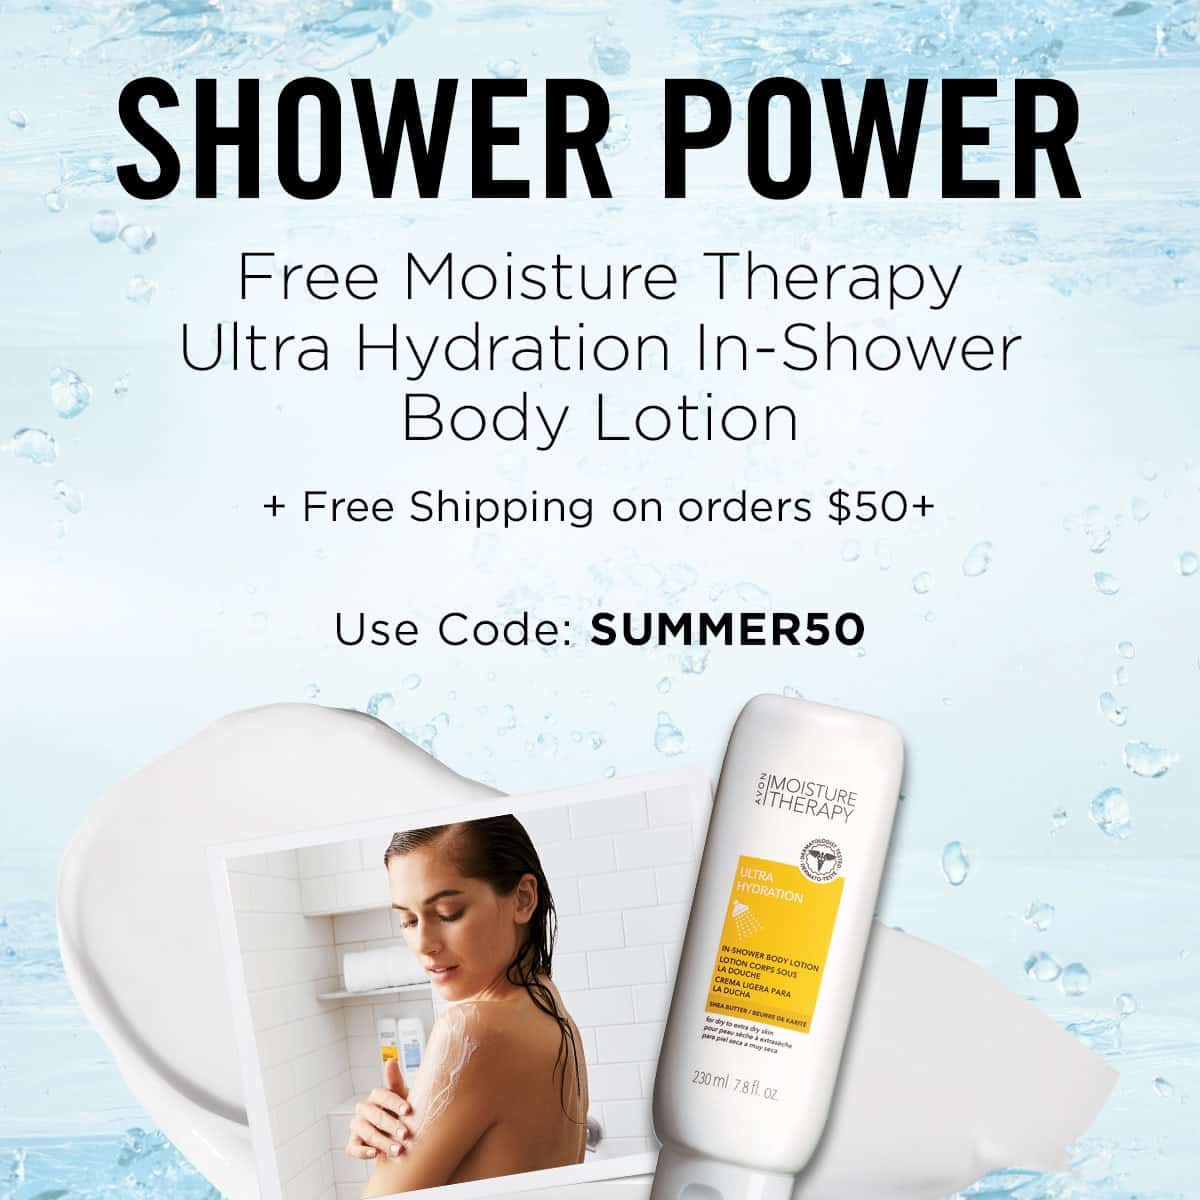 Avon free gift with purchase August 2019